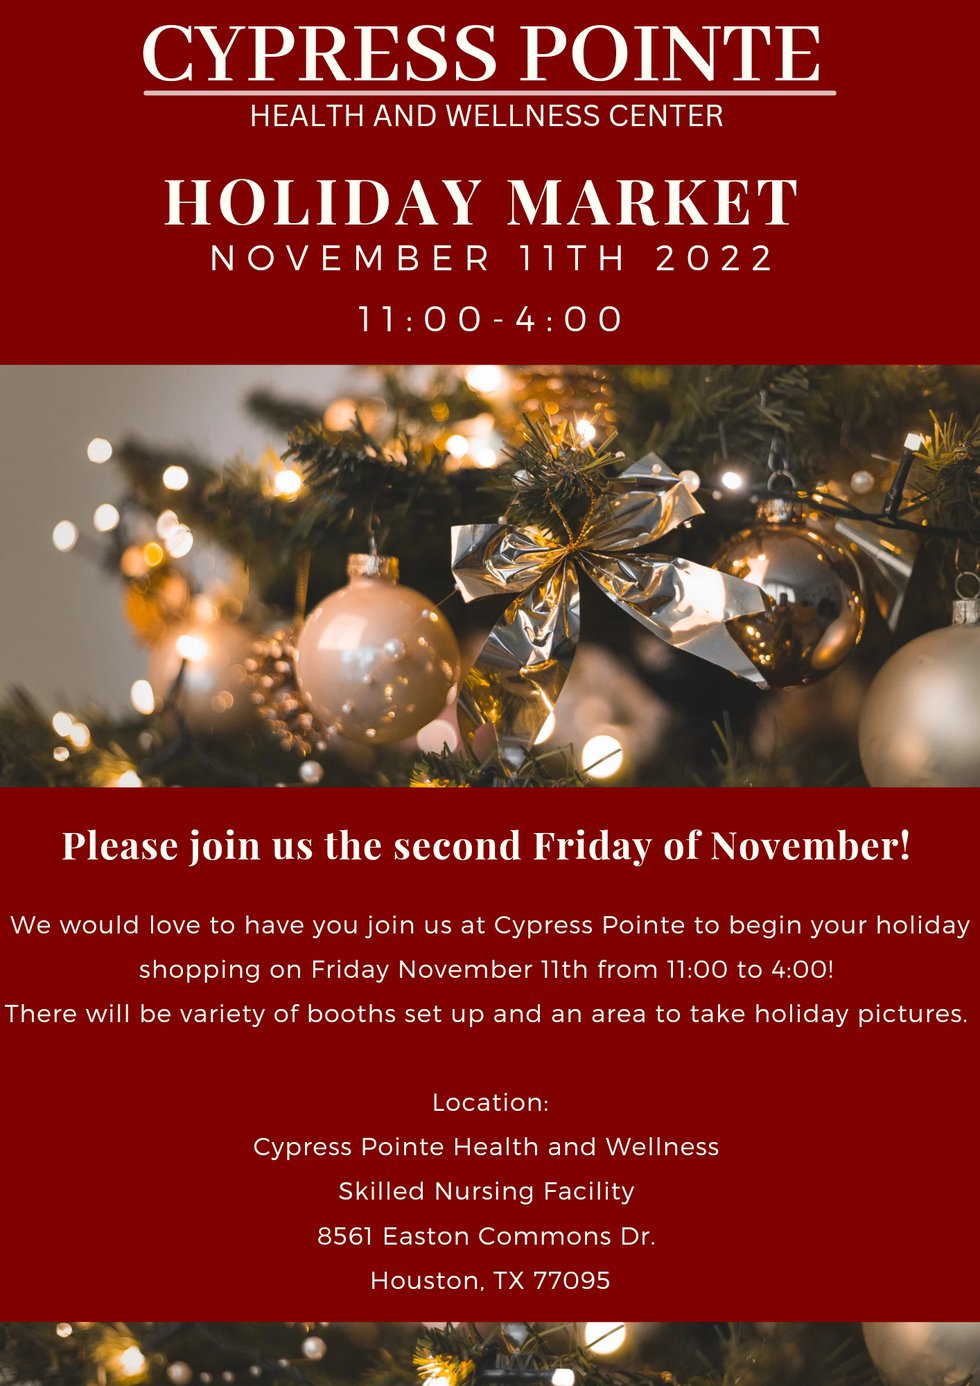 cypress-pointe-health-and-wellness-center-holiday-market.jpeg